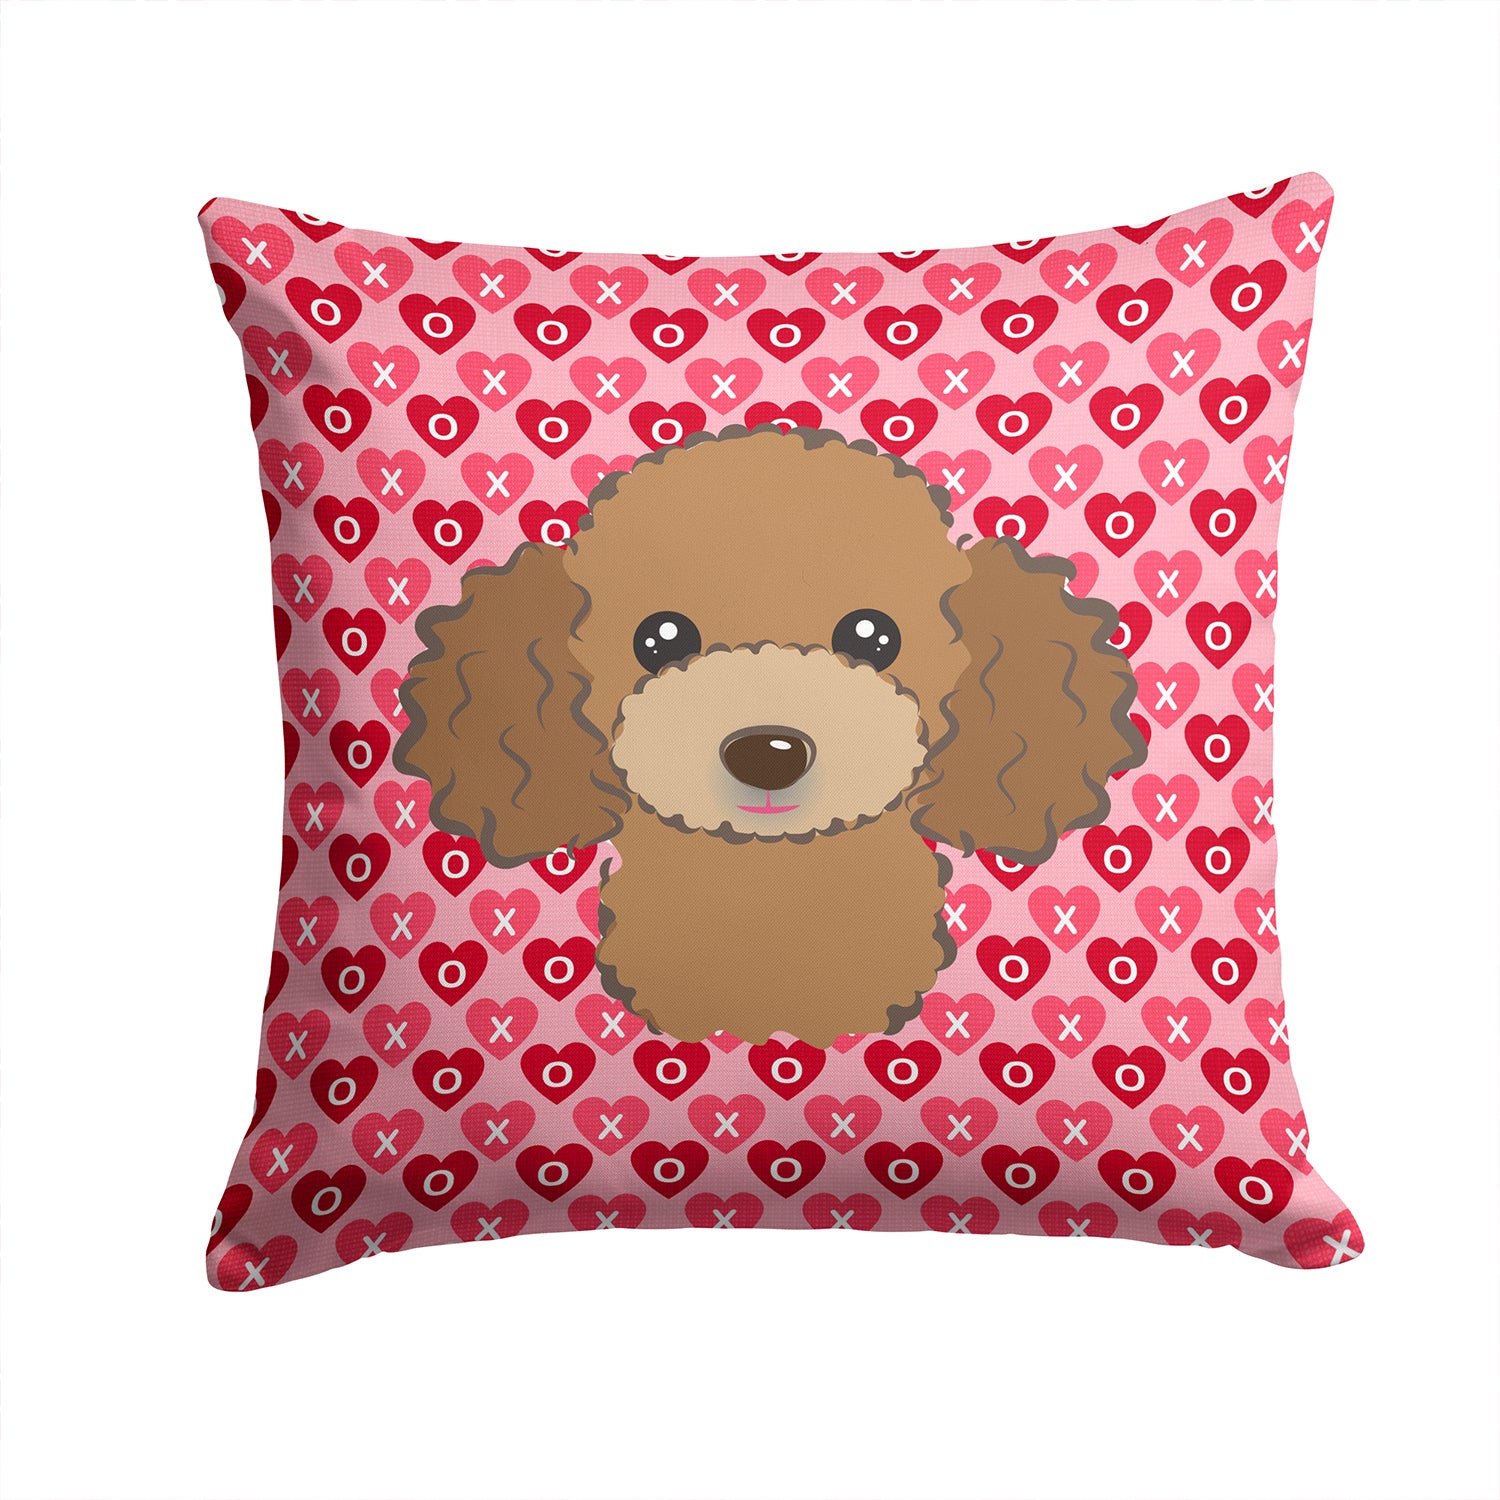 Chocolate Brown Poodle Hearts Fabric Decorative Pillow BB5326PW1414 - the-store.com